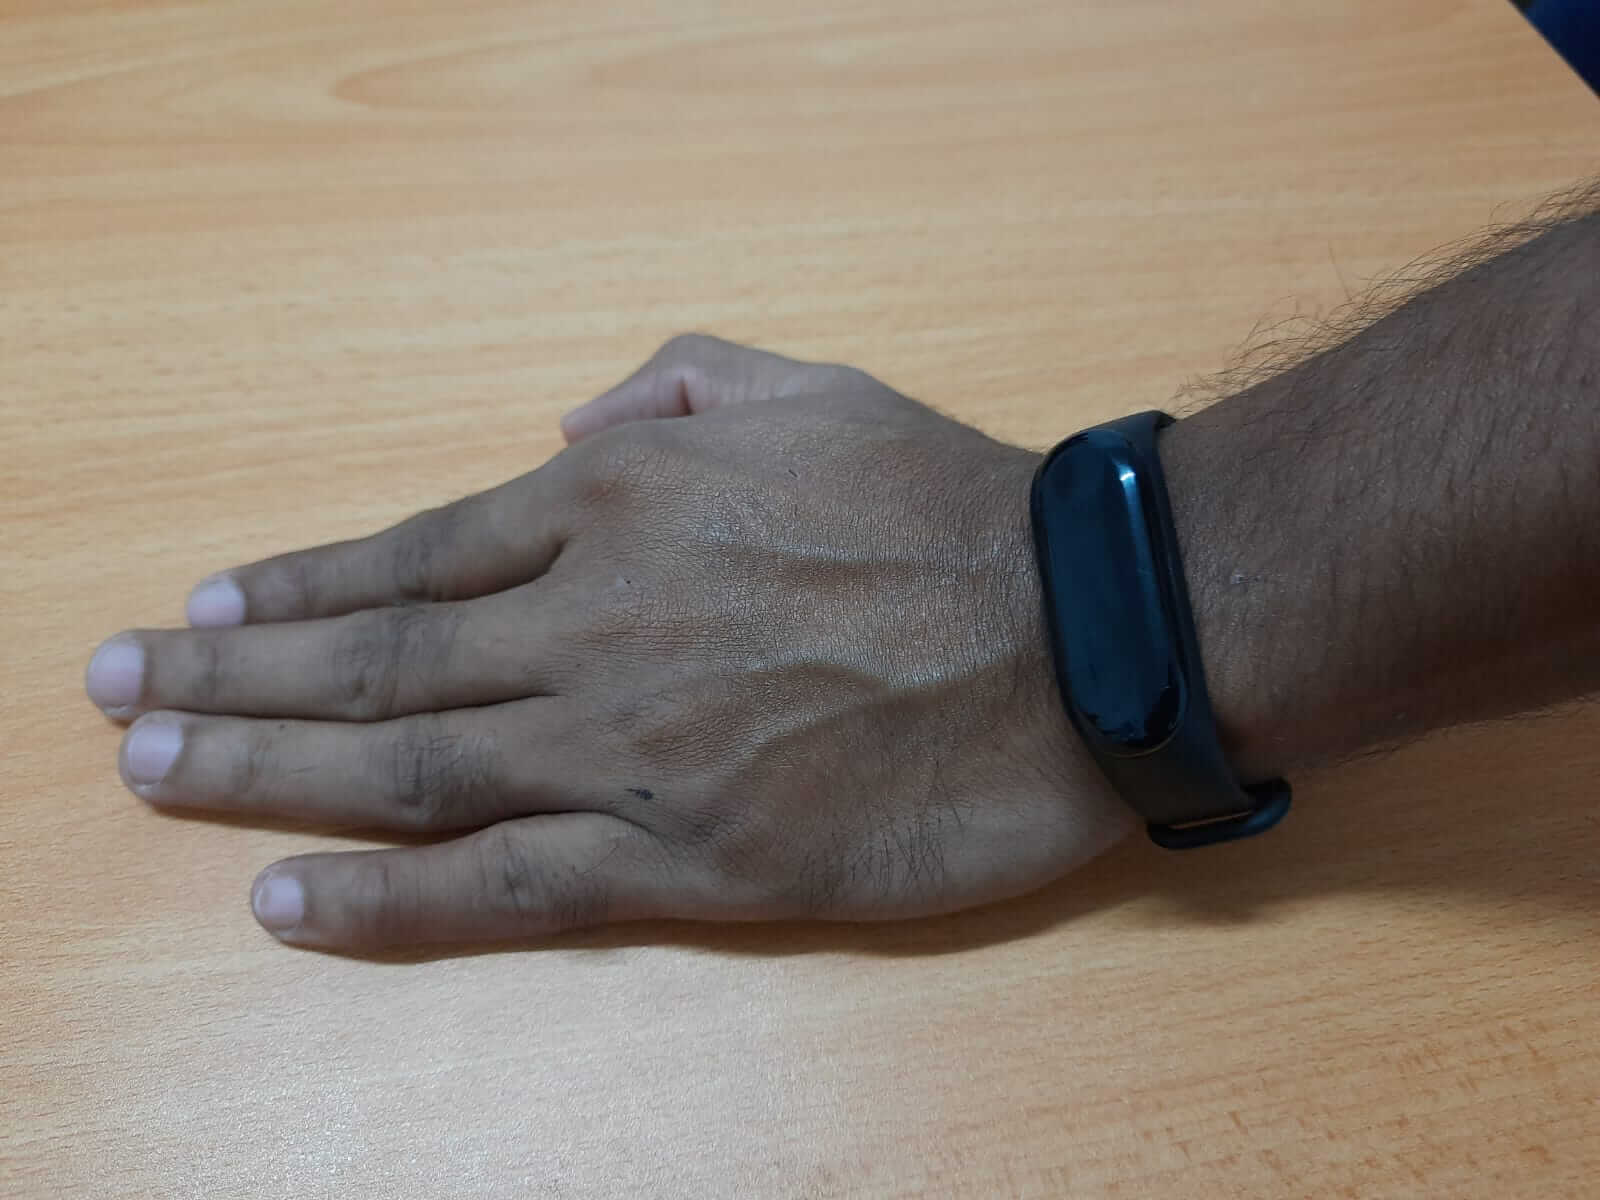 A wristband to detect hand hygiene and prevent the spread of covid.